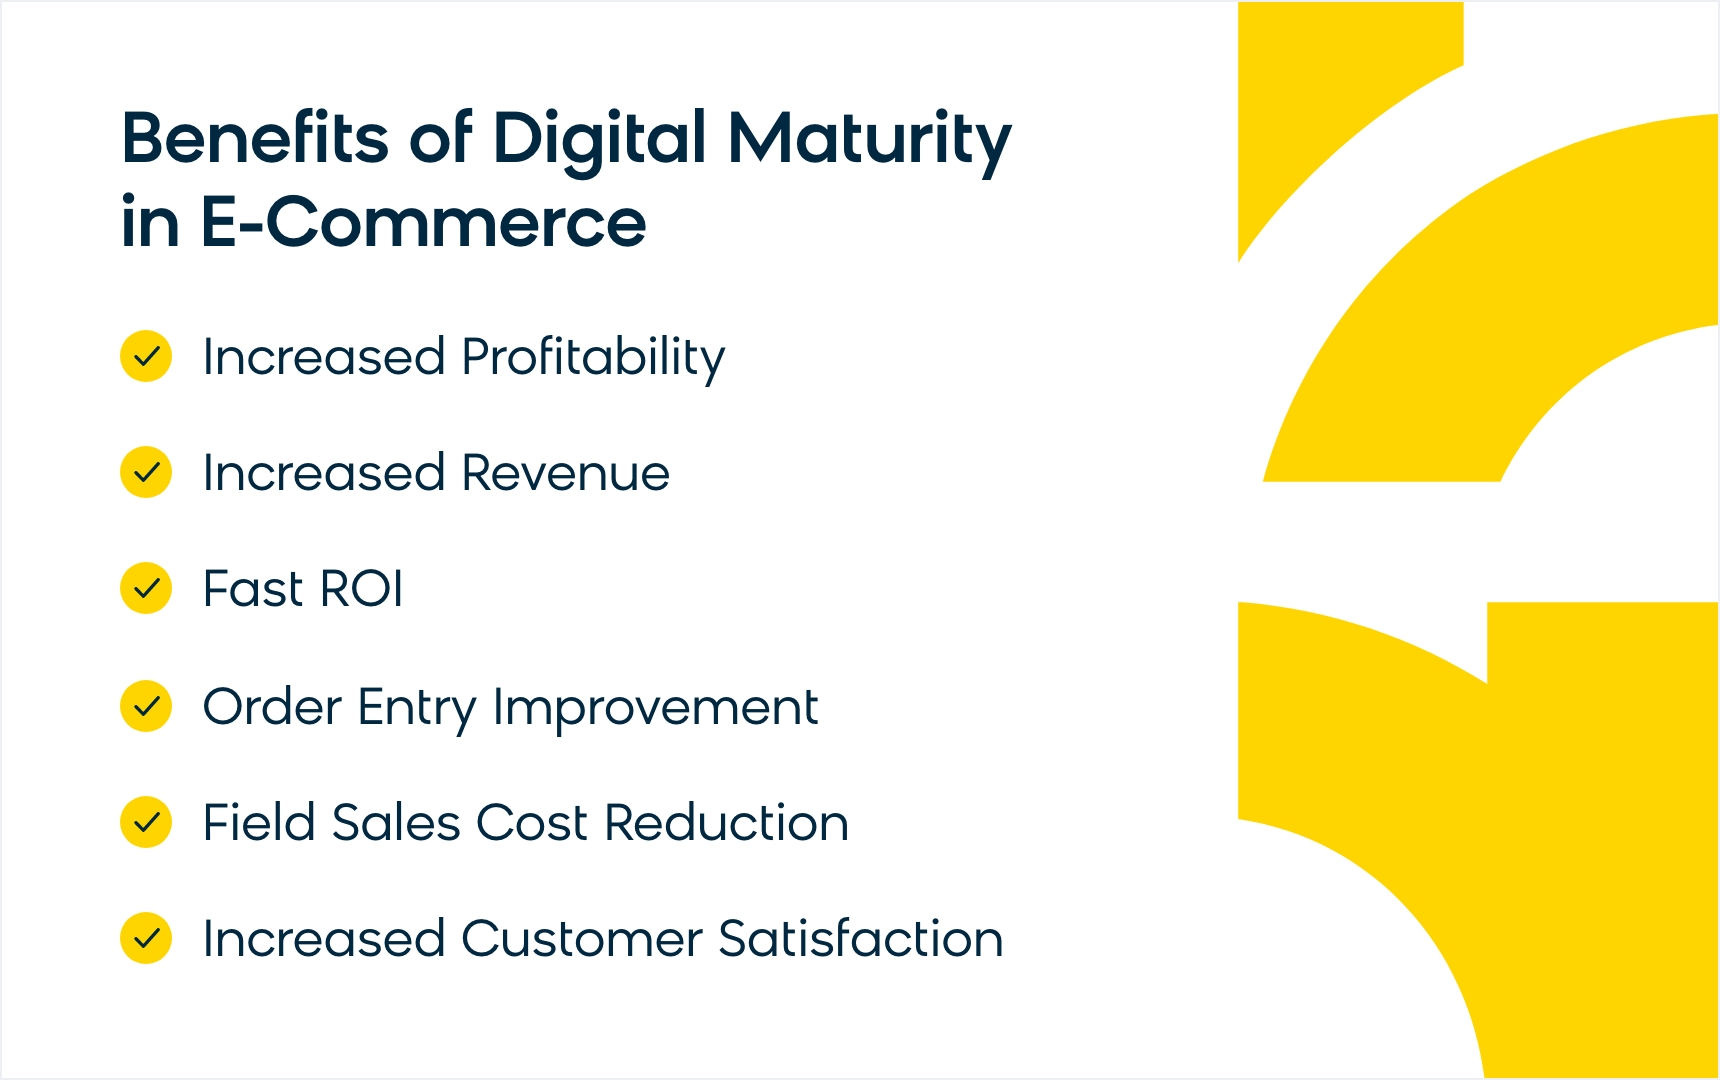 Benefits of Digital Maturity in E-Commerce